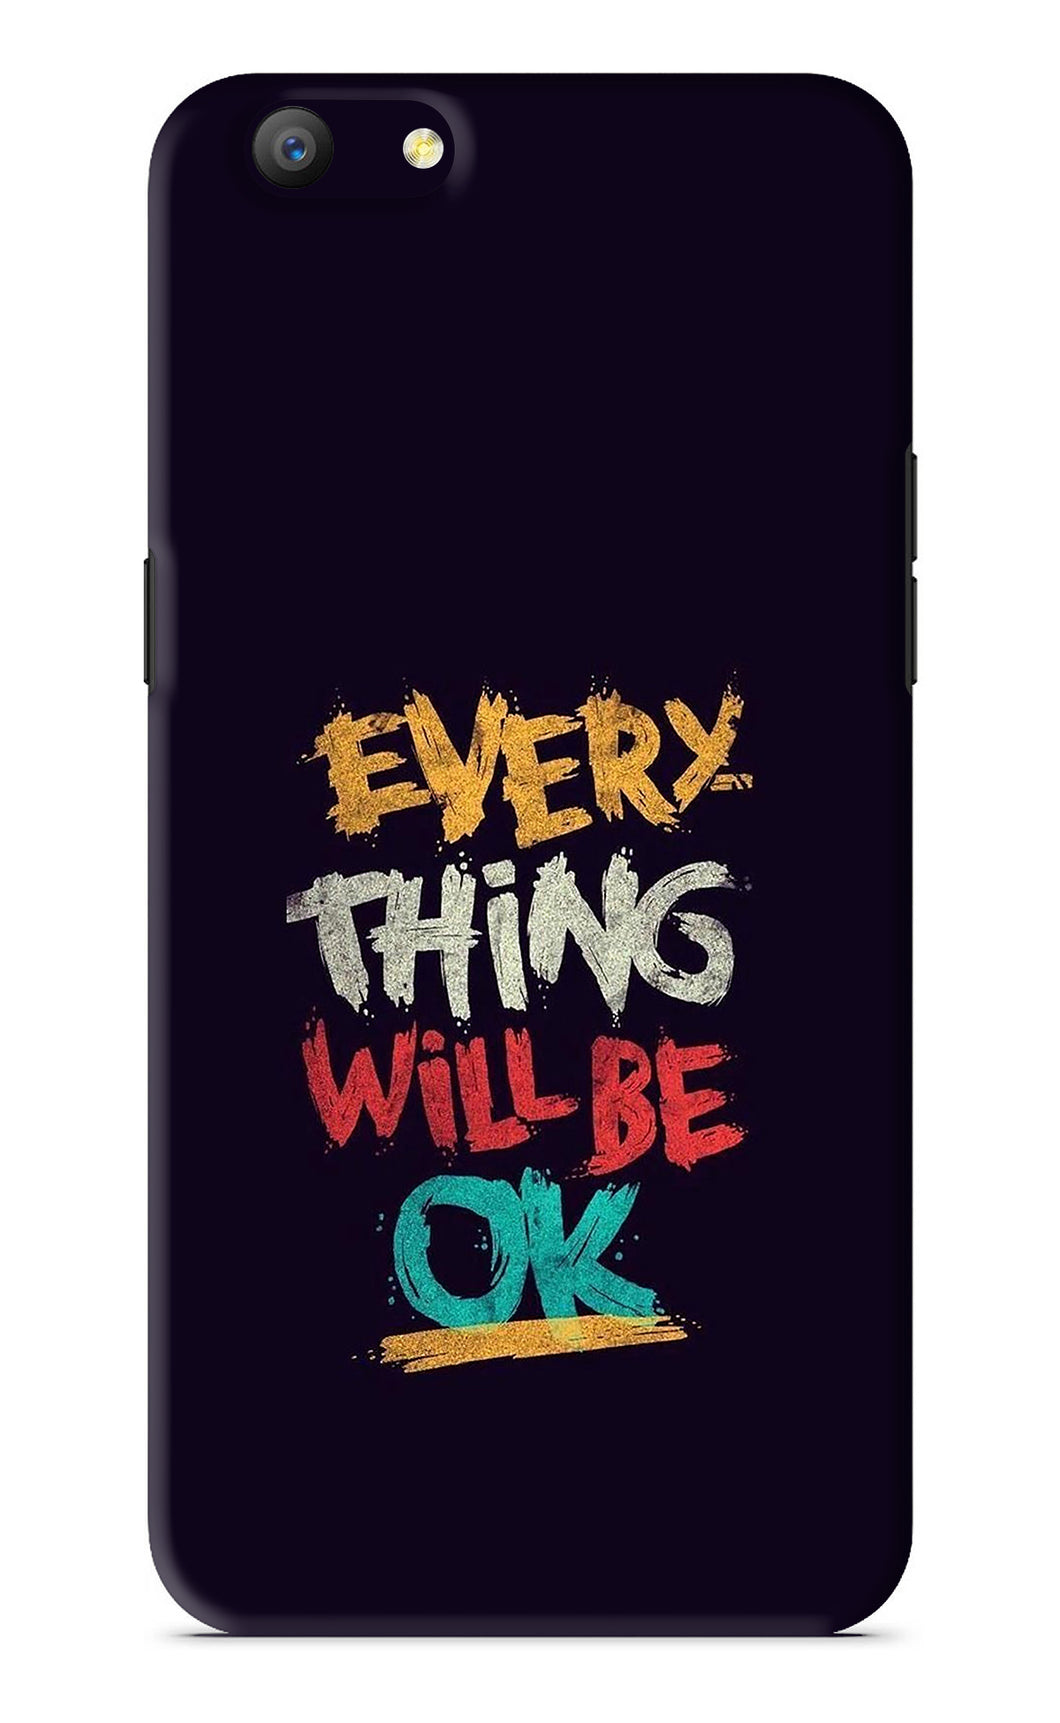 Everything Will Be Ok Oppo A57 Back Skin Wrap